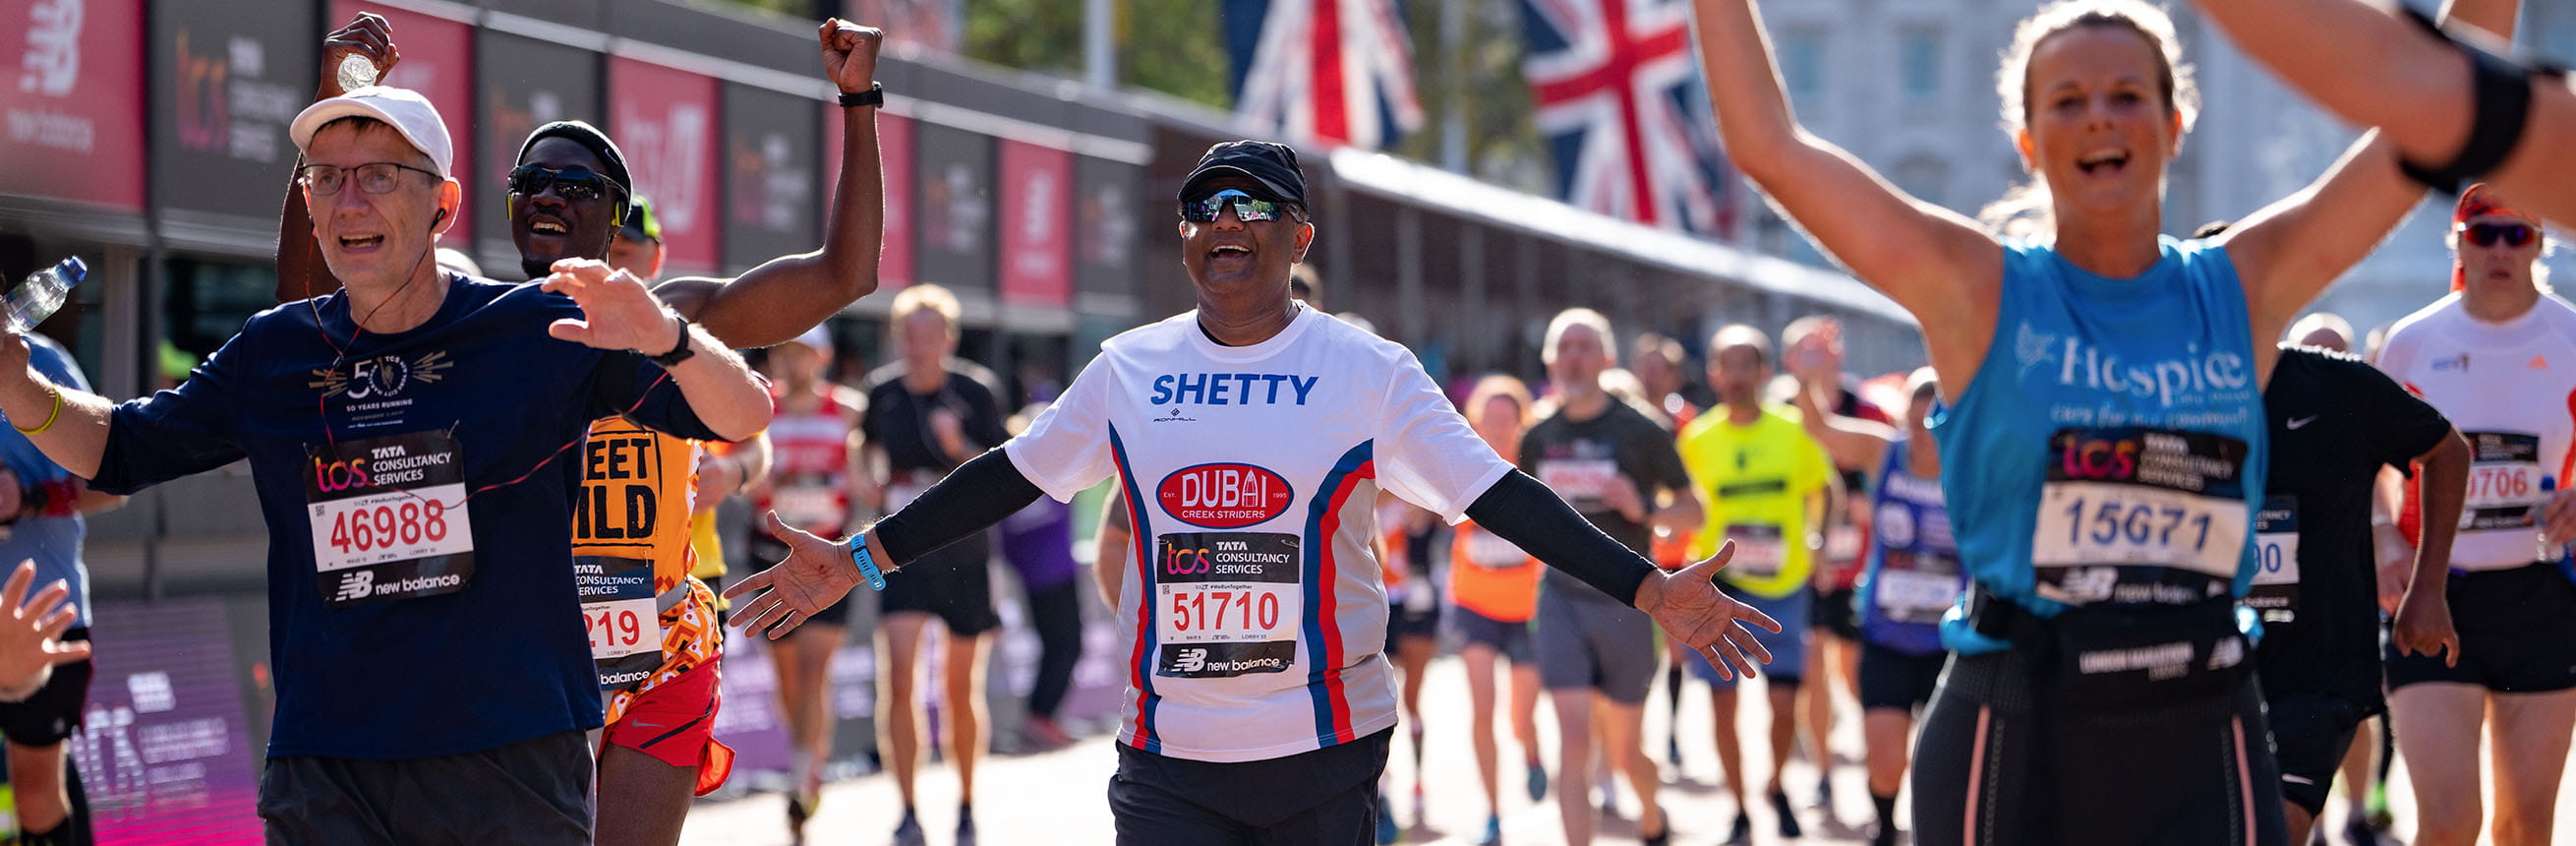 Participants celebrate as they head towards the Finish Line of the TCS London Marathon